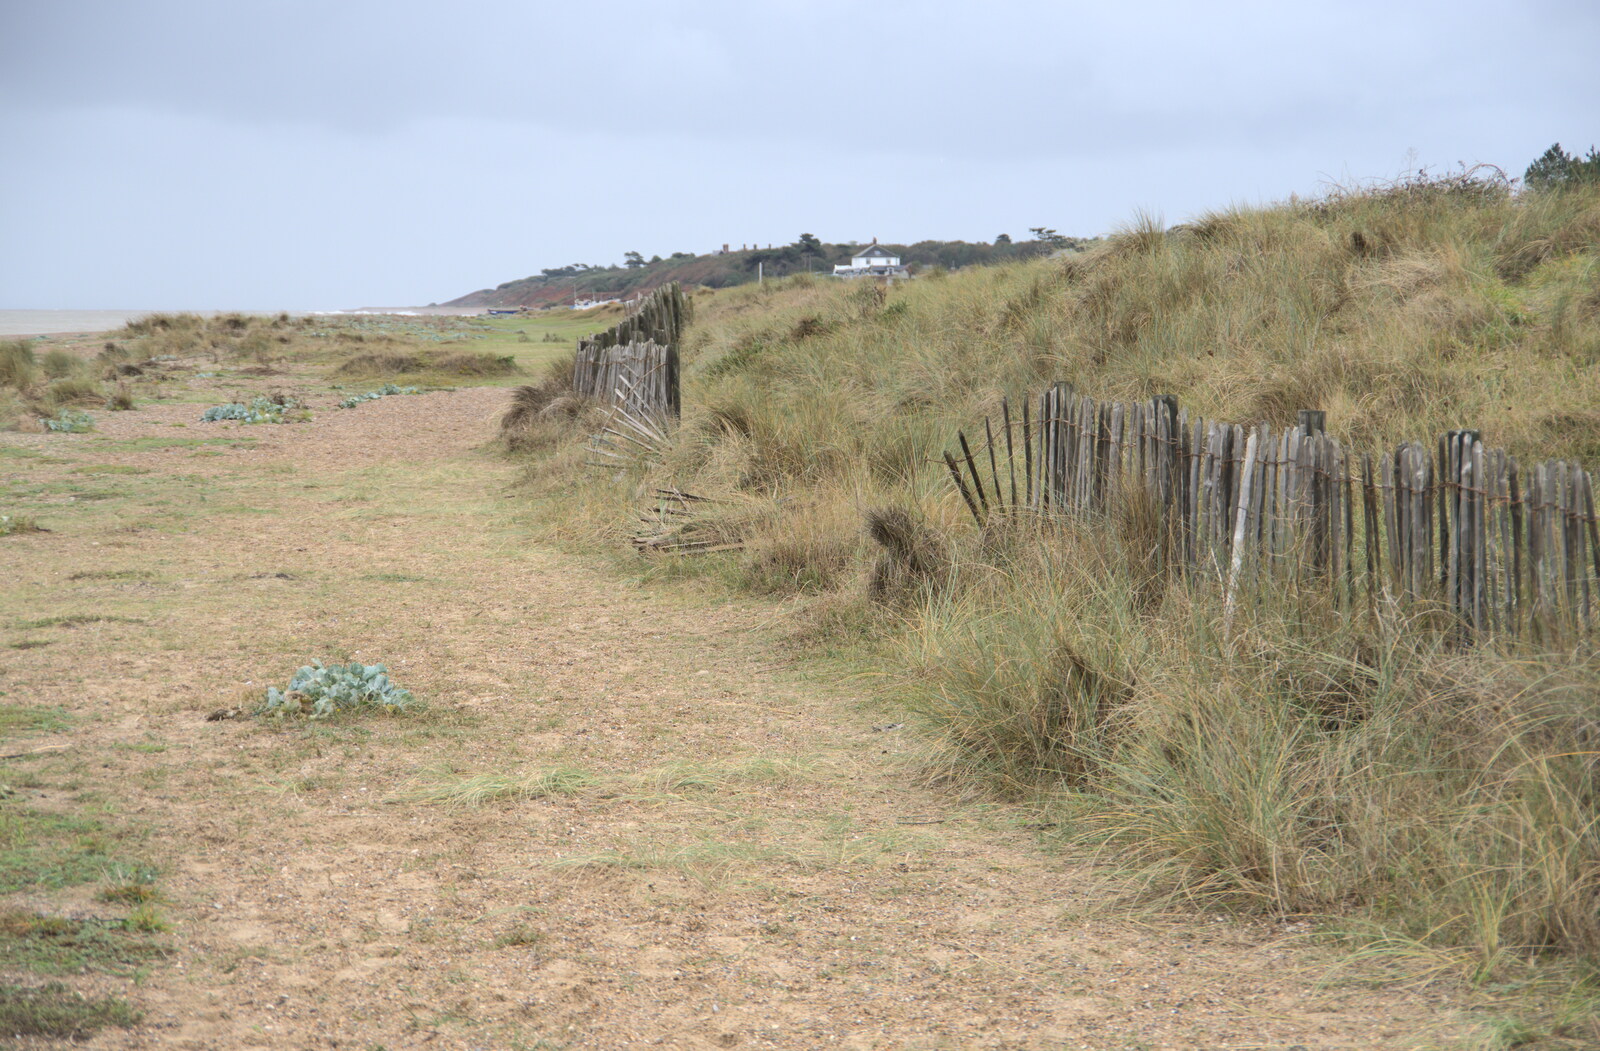 A collapsing fence from Sizewell Beach and the Lion Pub, Sizewell and Theberton, Suffolk - 4th October 2020